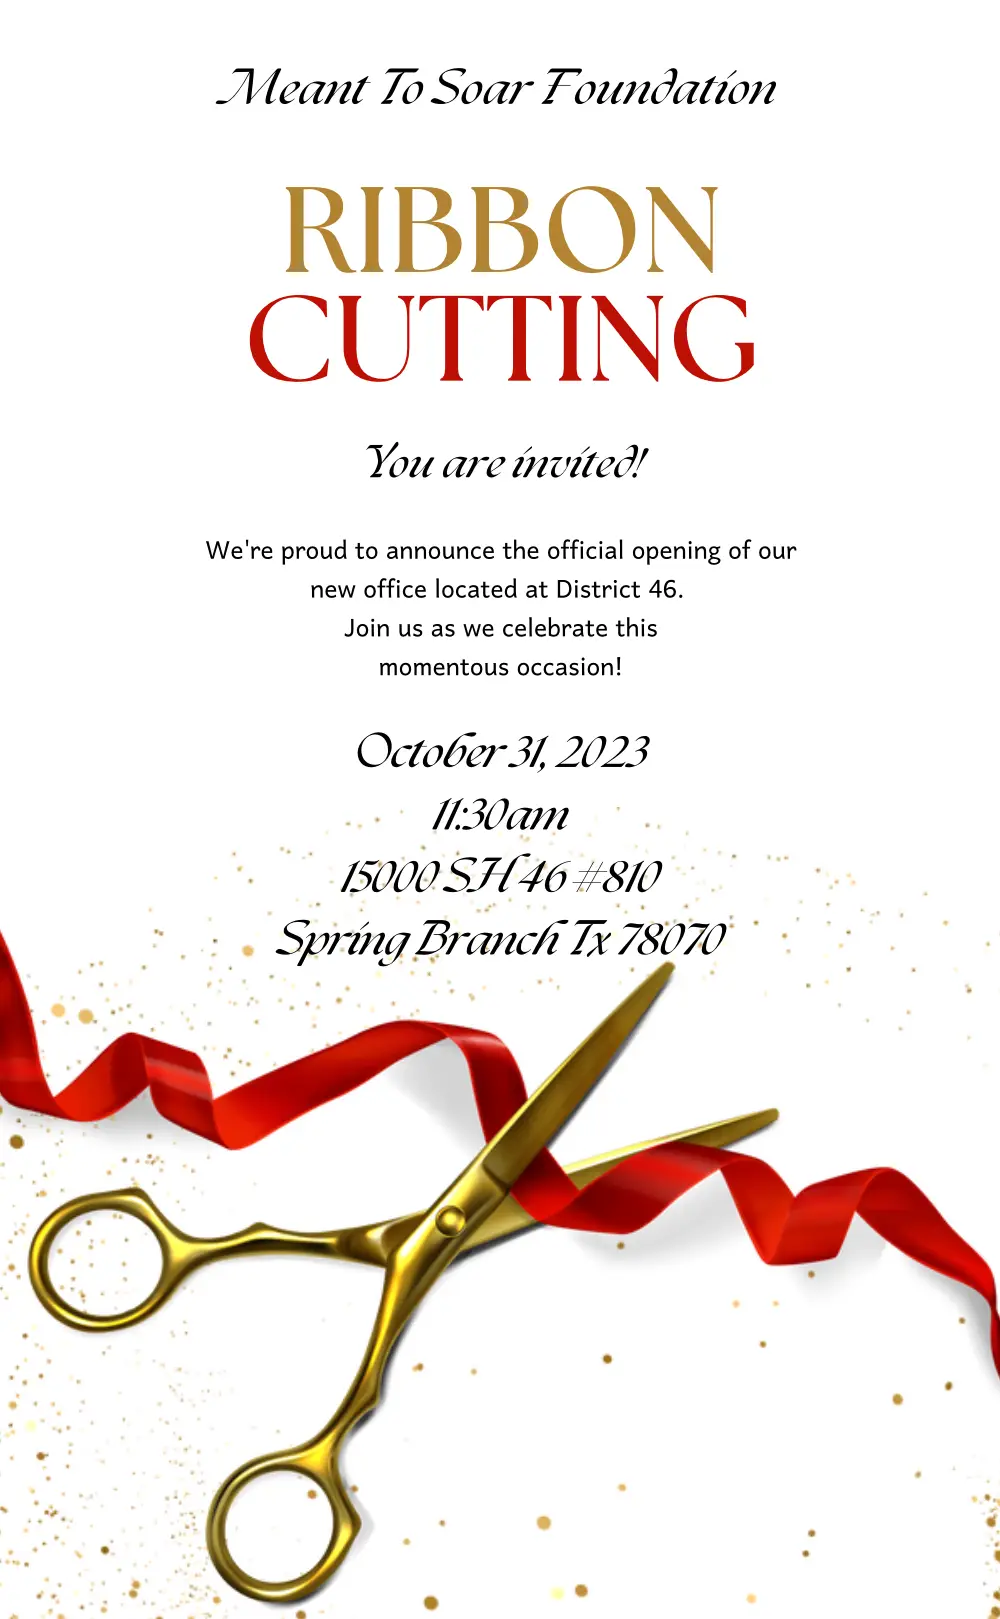 Meant To Soar Ribbon cutting invitation